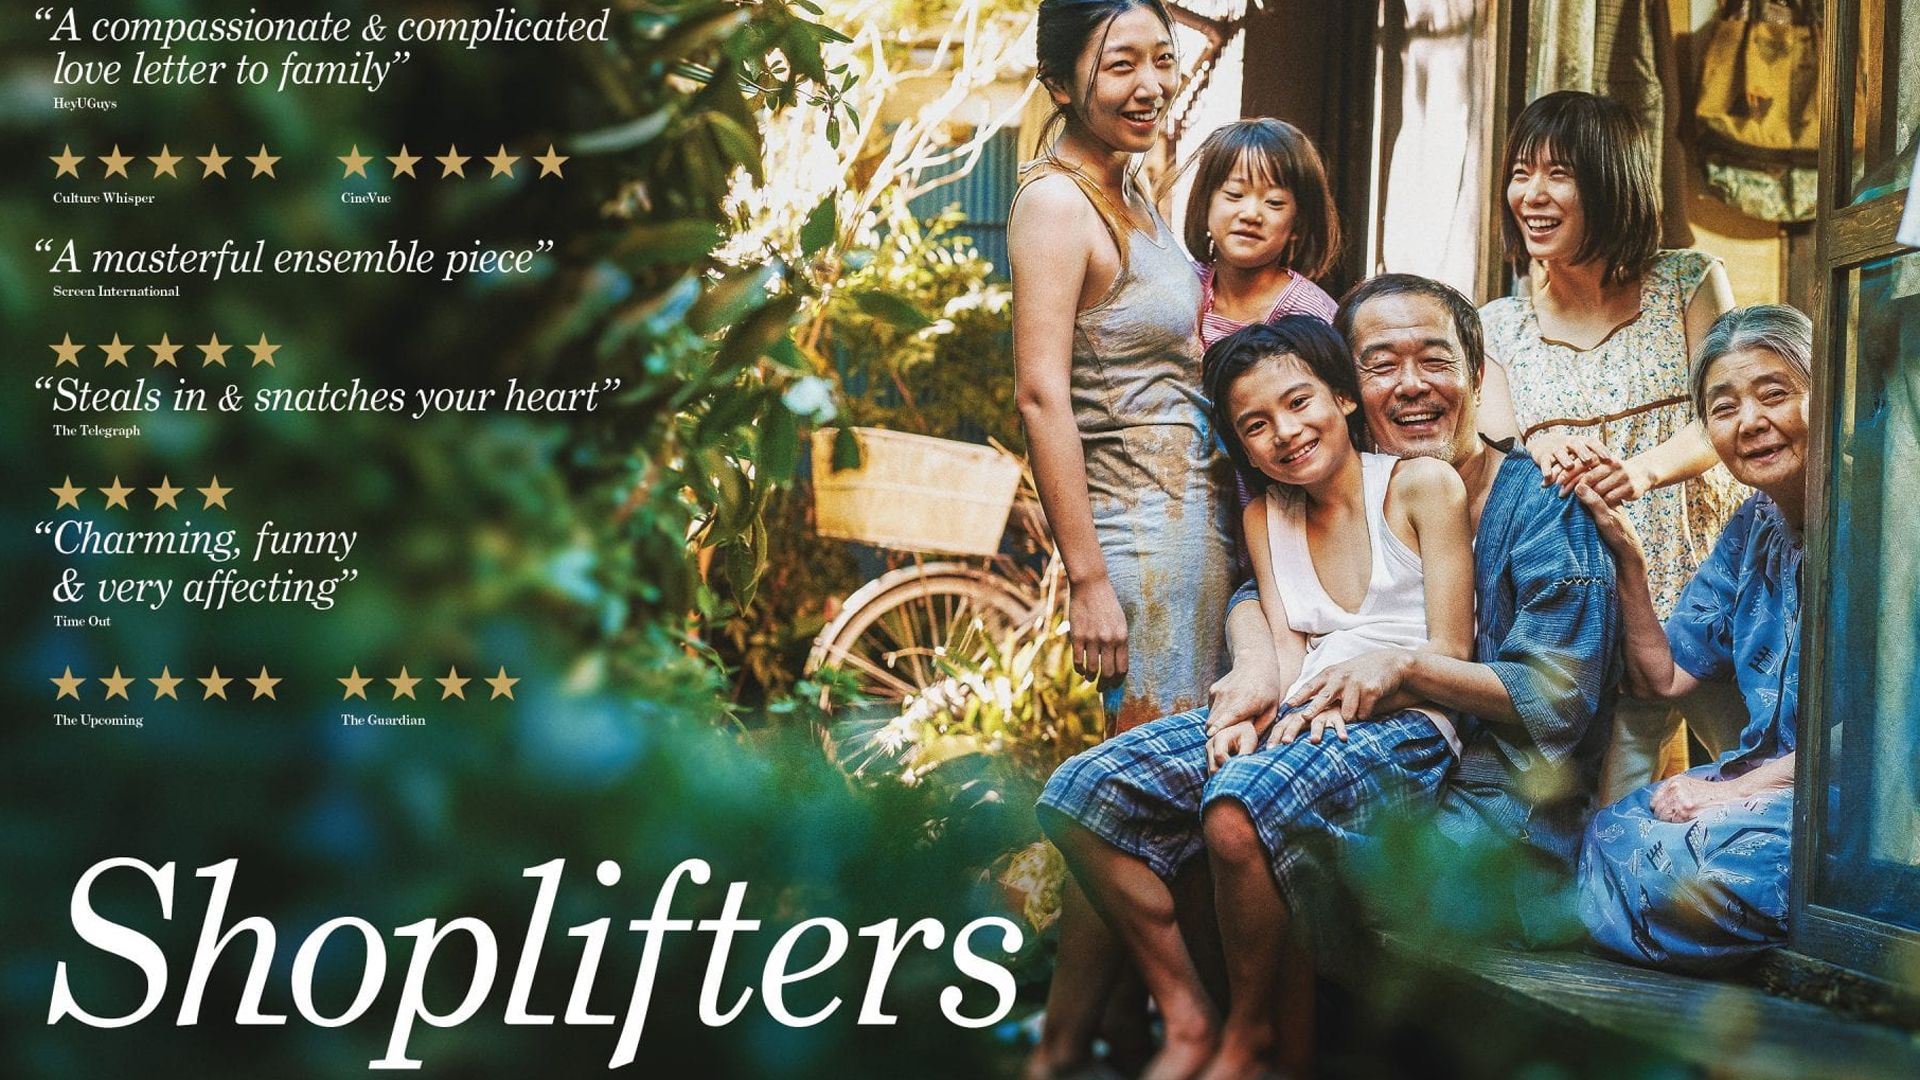 Movie poster for Shoplifters